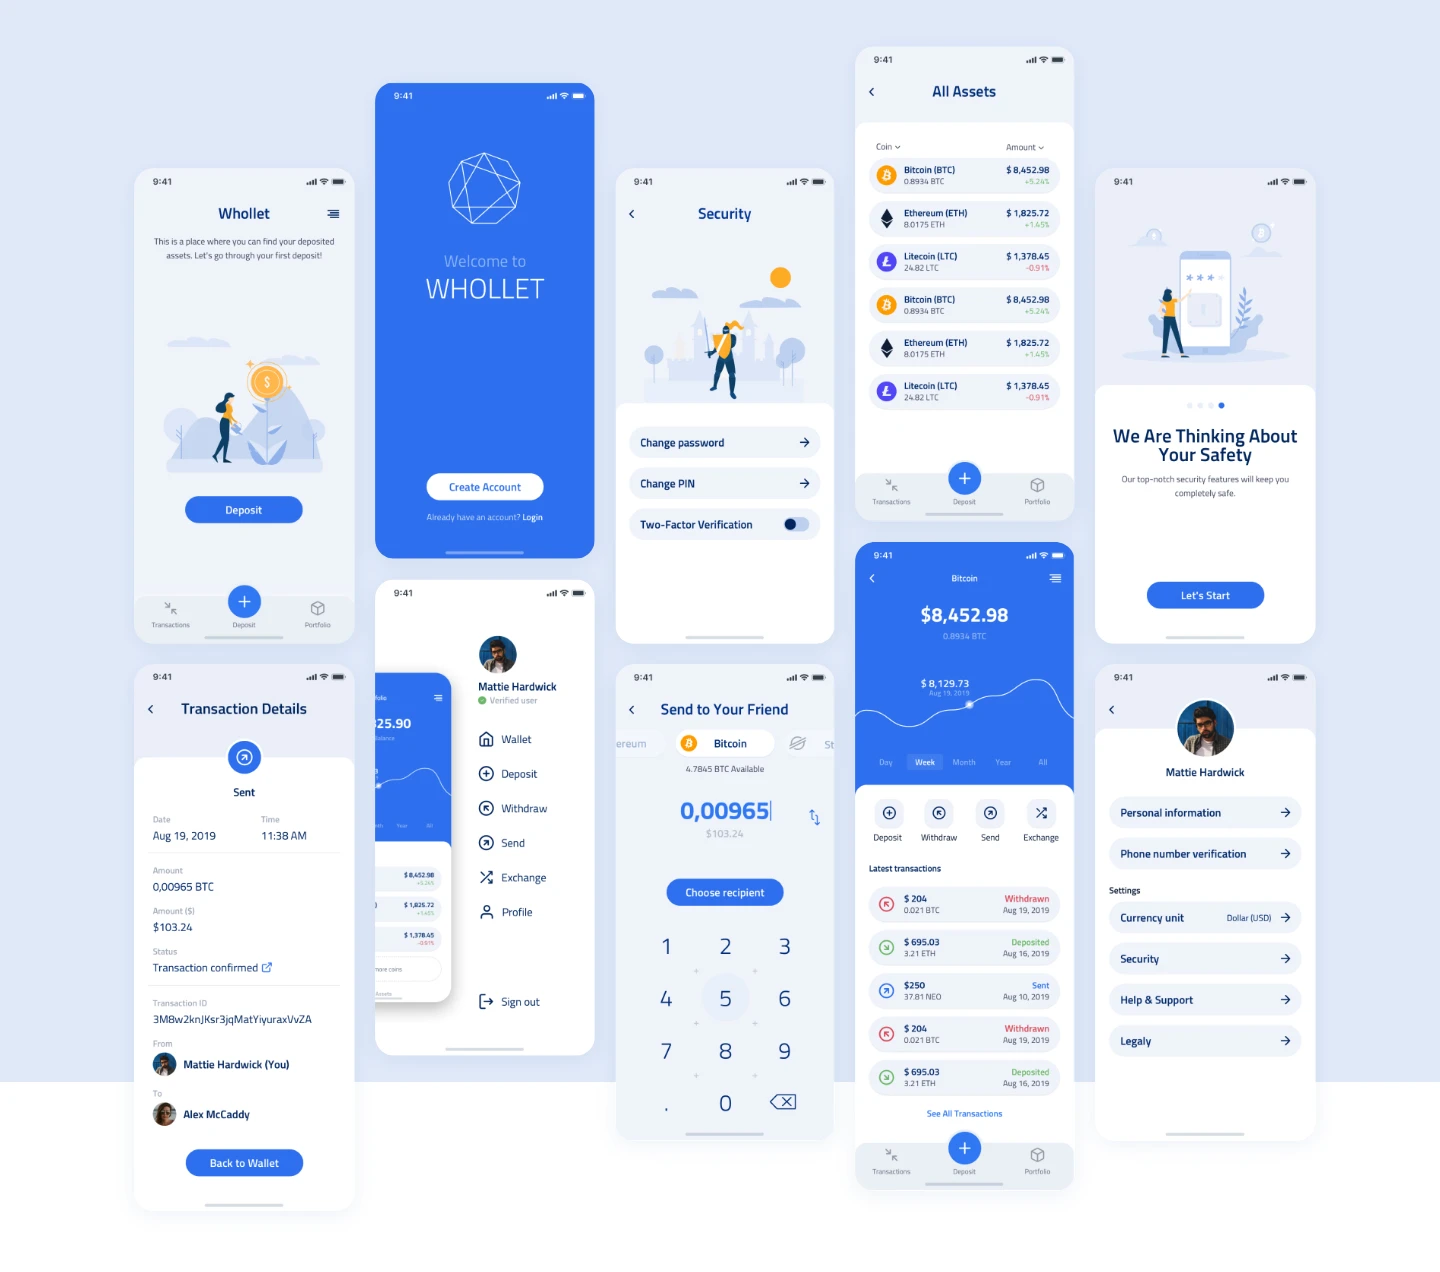 Whollet Crypto Wallet Free UI Kit - A comprehensive crypto wallet UI kit. A completely free resource for product developers / UI designers all over the world who want to use and help develop standardized crypto wallet interactions and design patterns.